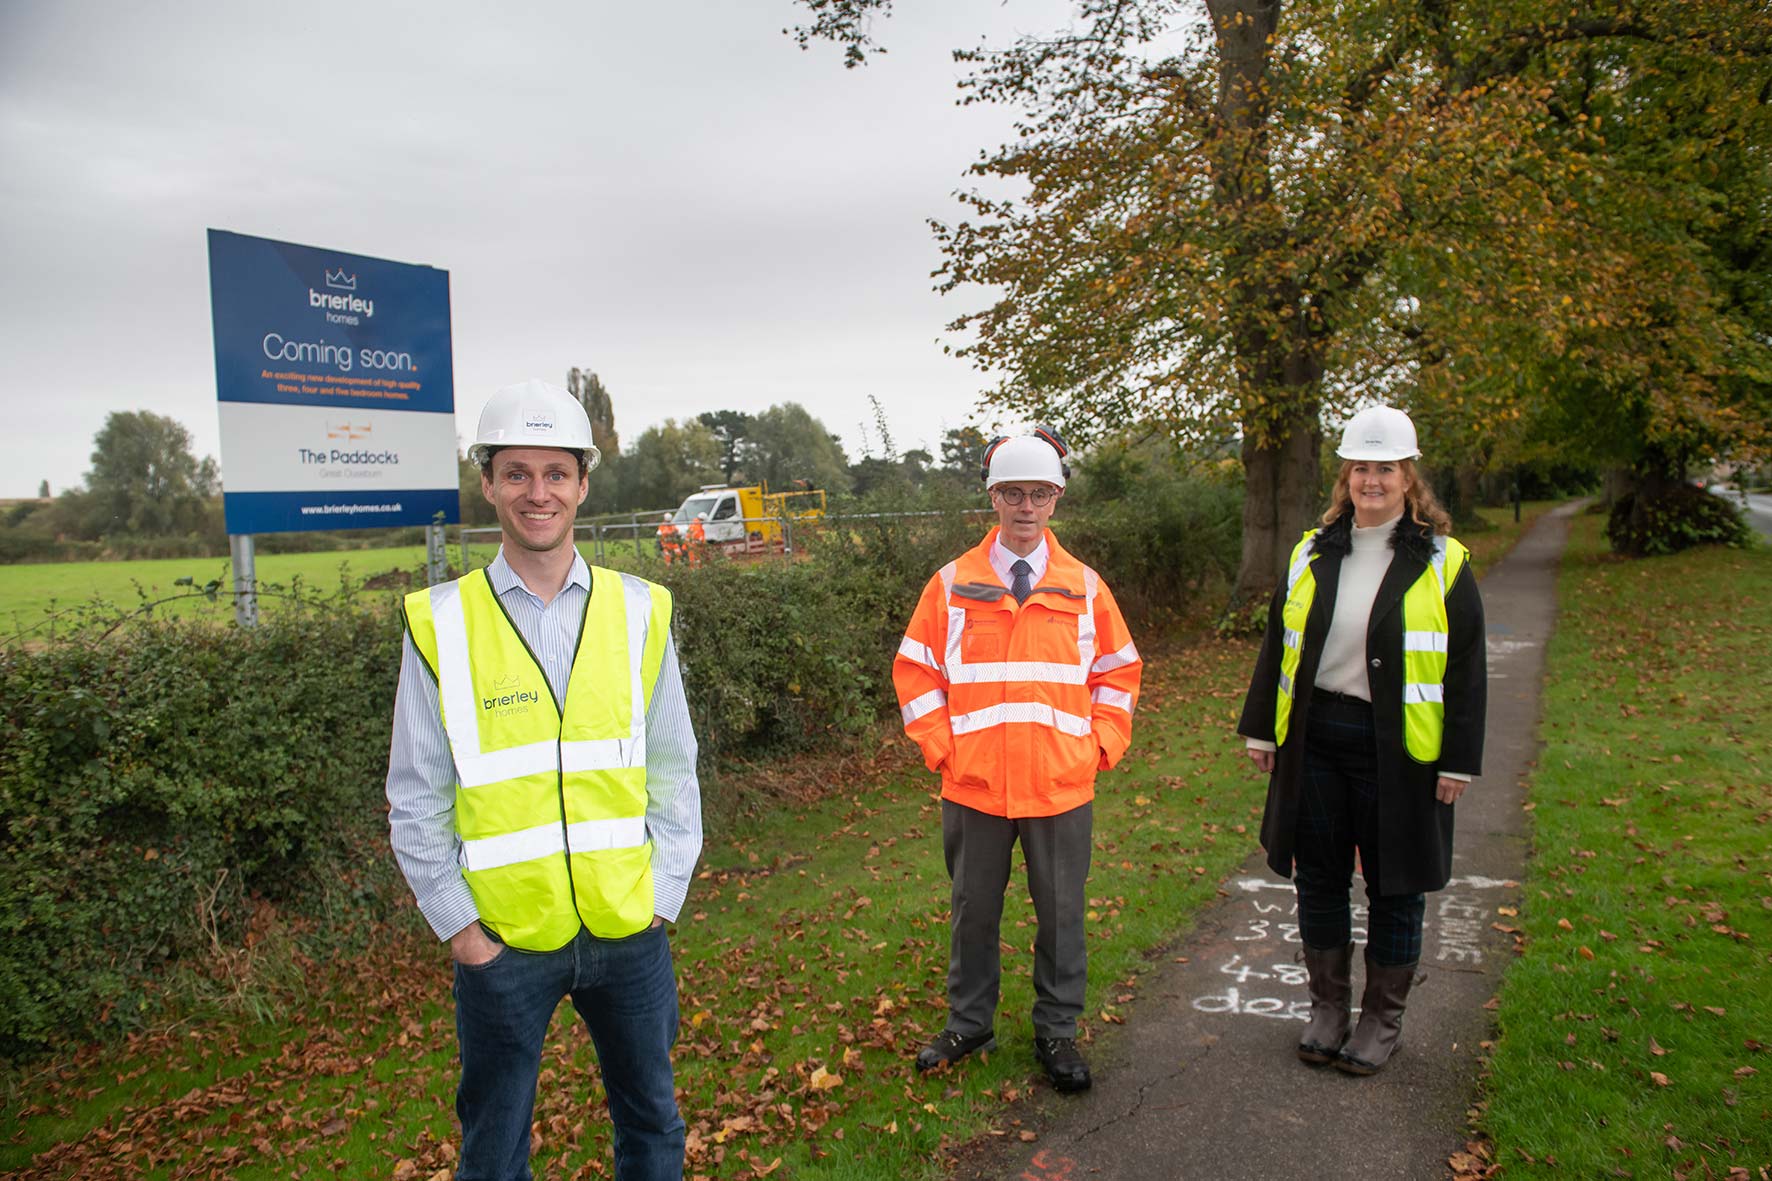 Matt O’Neill, Director, Brierley Homes; Paul Storey, Senior Agent from NY Highways; and Rachel Steel, Project Manager from Brierley Homes, at The Paddocks development in Great Ouseburn